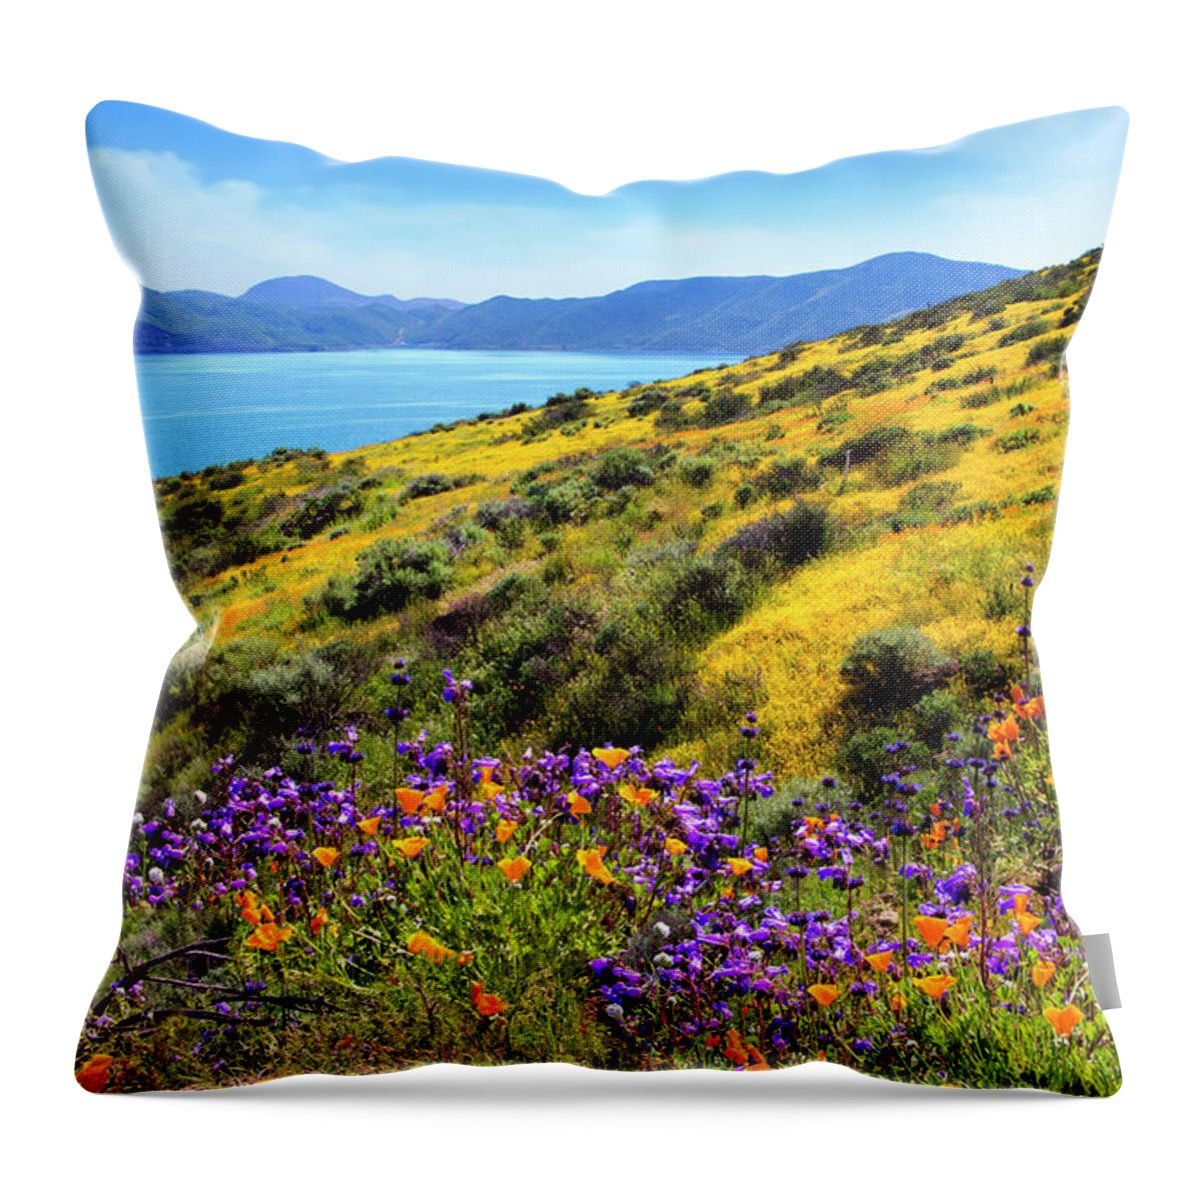 Superbloom Throw Pillow featuring the photograph Heaven Scent - Superbloom 2019 by Lynn Bauer